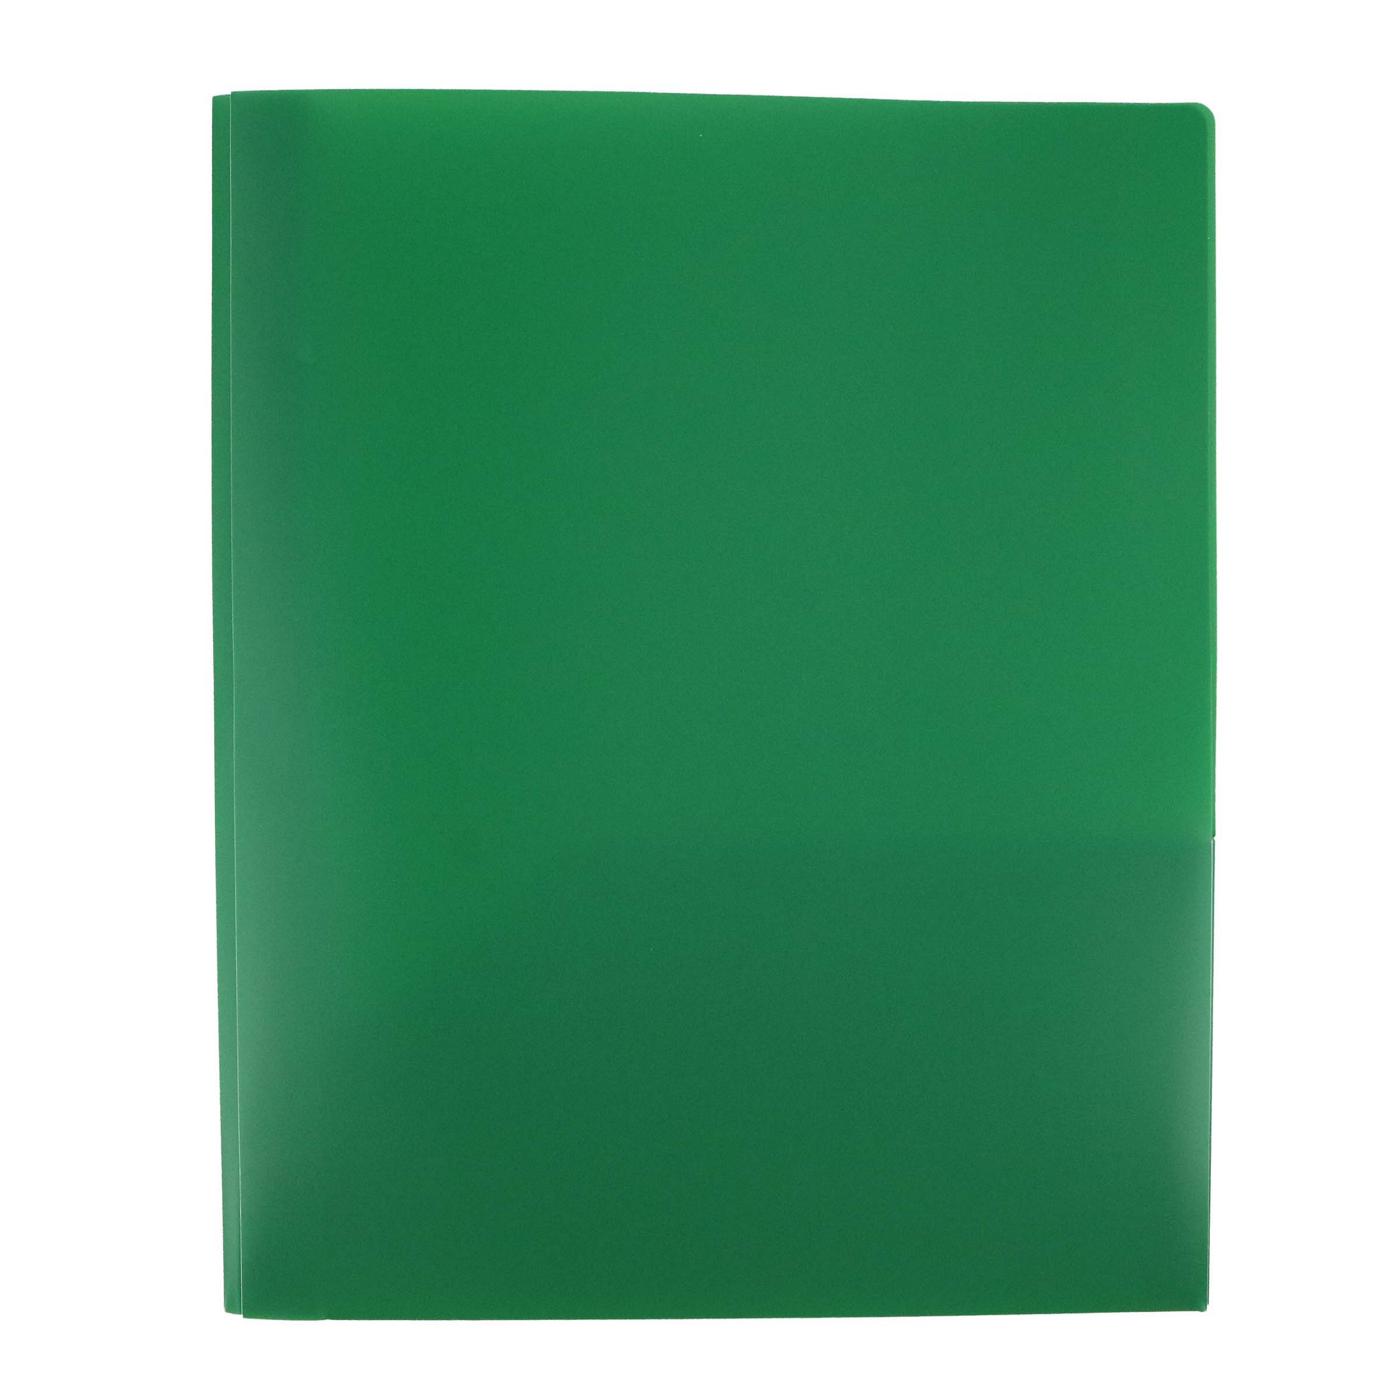 H-E-B Pocket Poly Folder with Prongs - Green; image 1 of 2